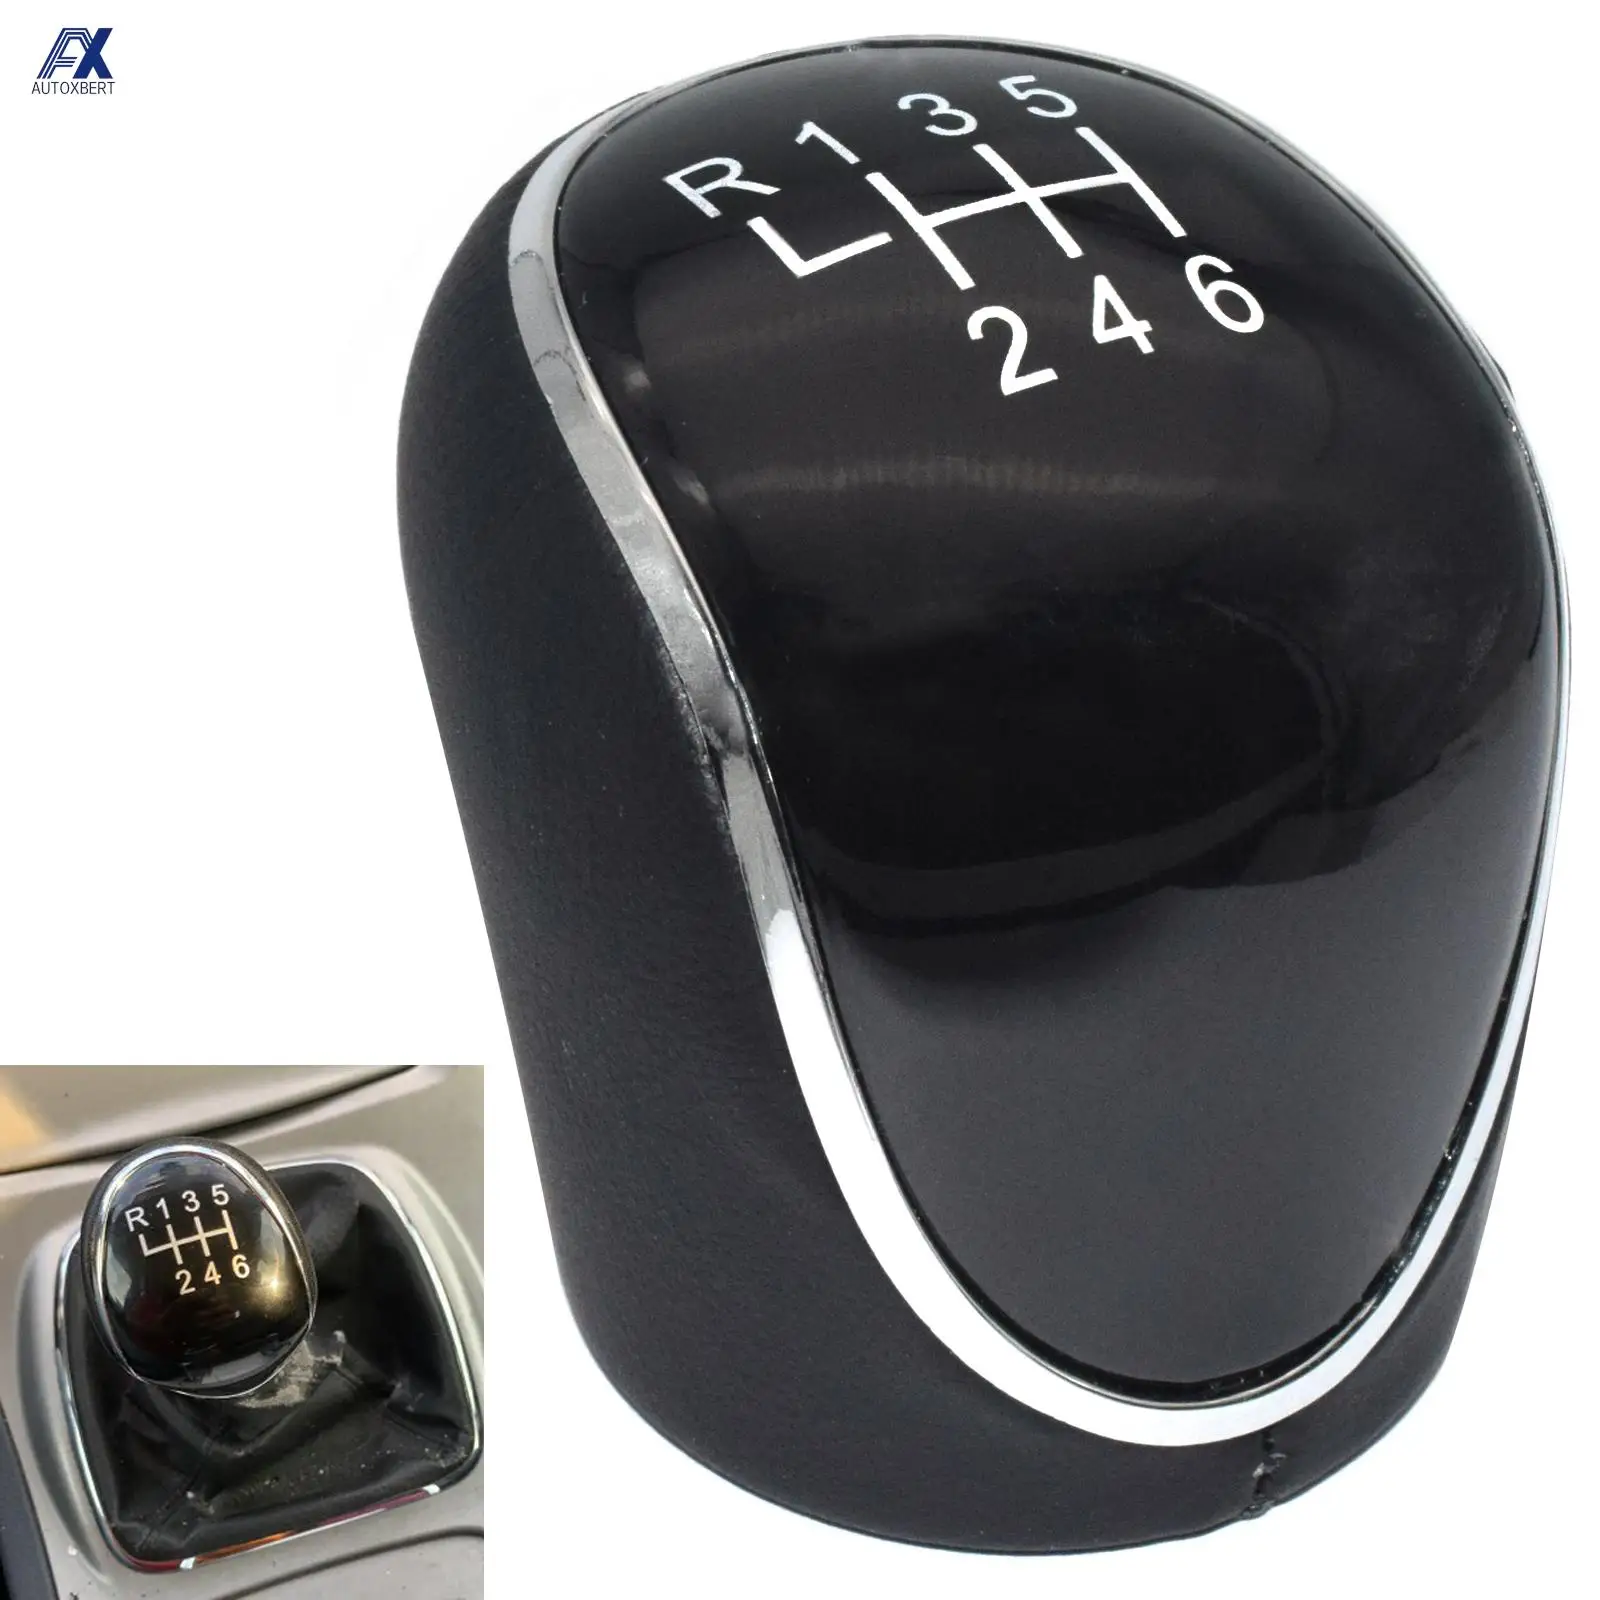 6/5 Speed Car Gear Shift Knob Shifter Stick Lever Pen For Ford Focus MK3 S-MAX C-MAX Kuga Mondeo Galaxy Transit Black